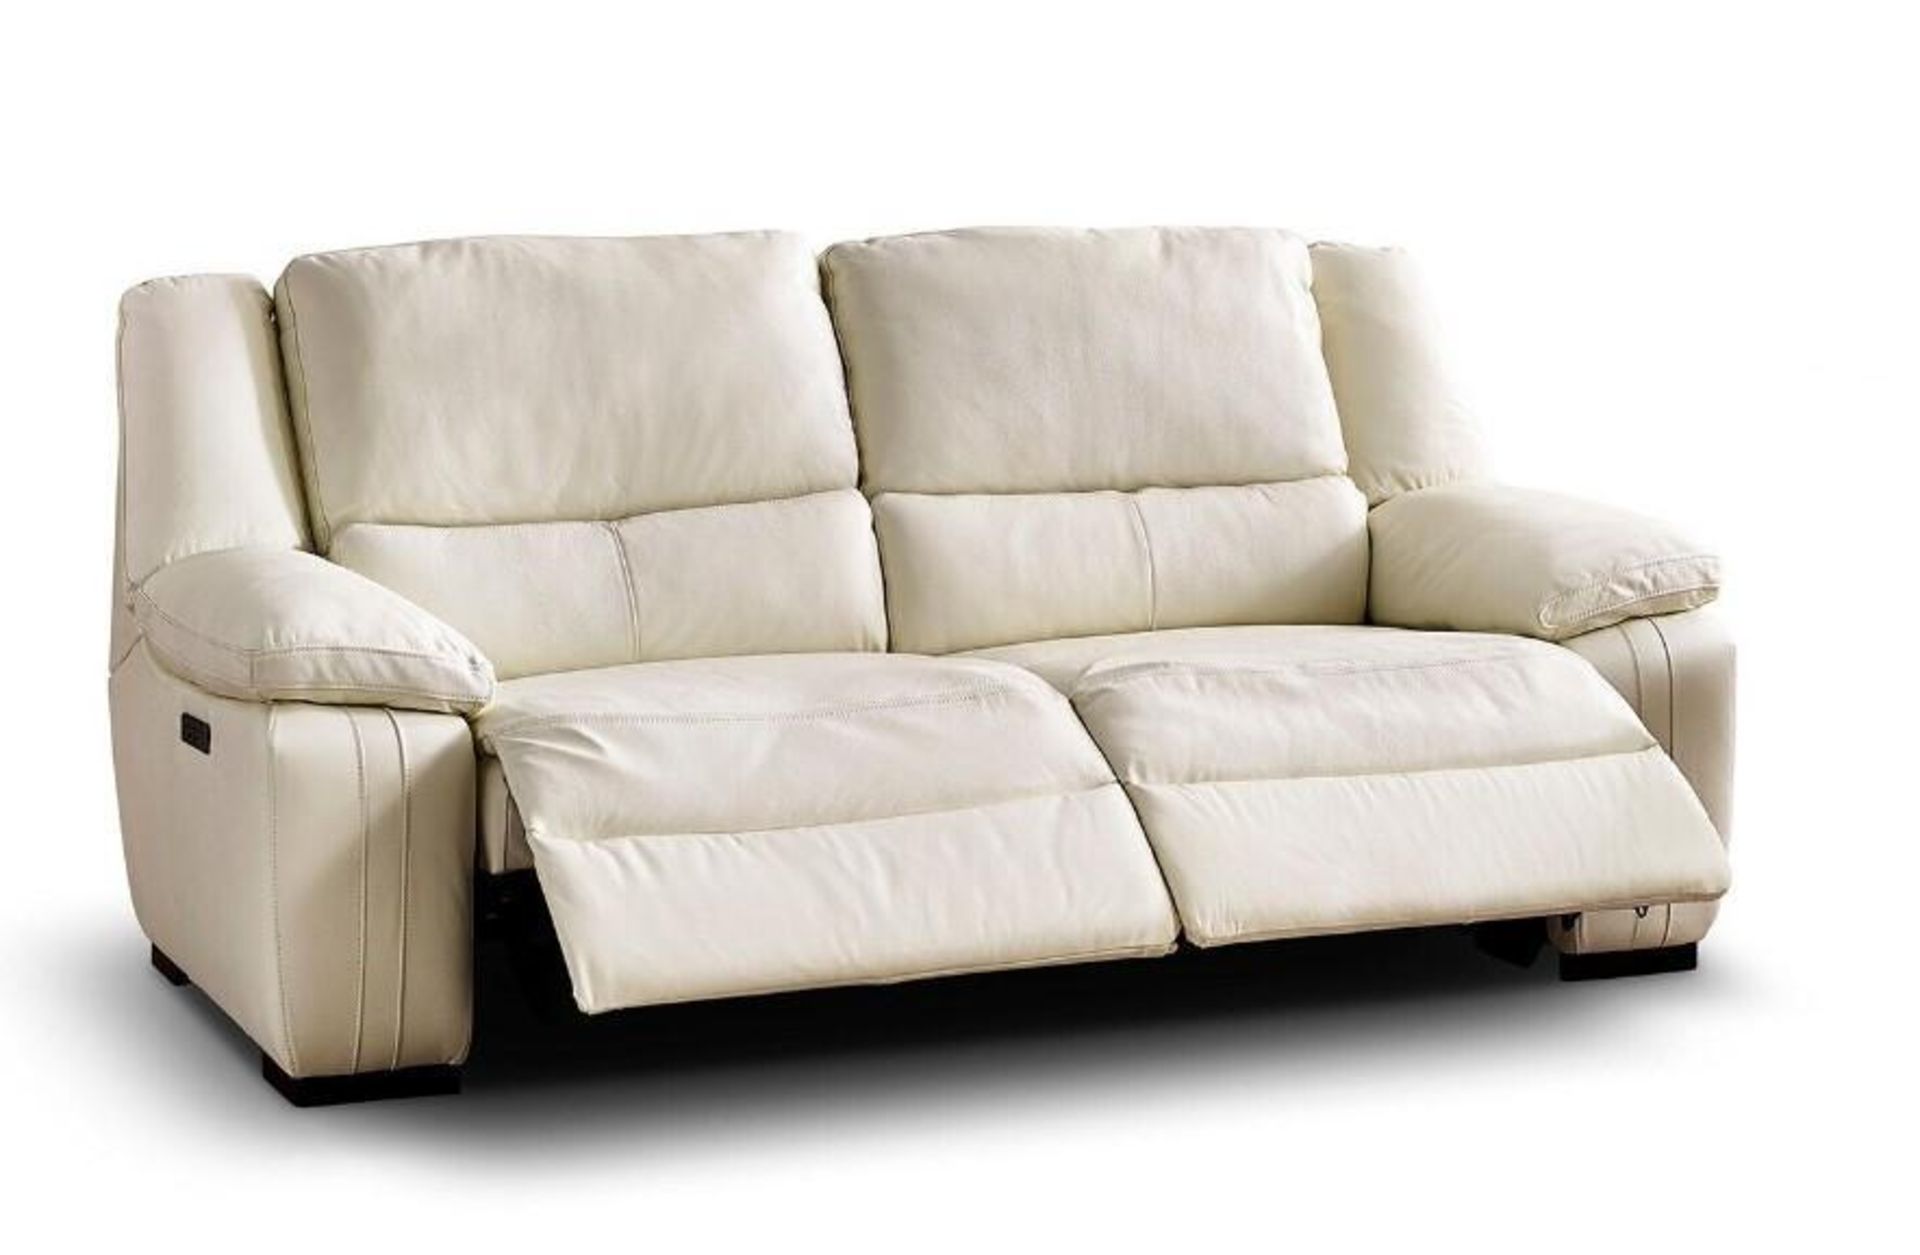 Brand new and boxed SCS Fallon 2 seater electric reclining sofa in Cream. - Bild 7 aus 7